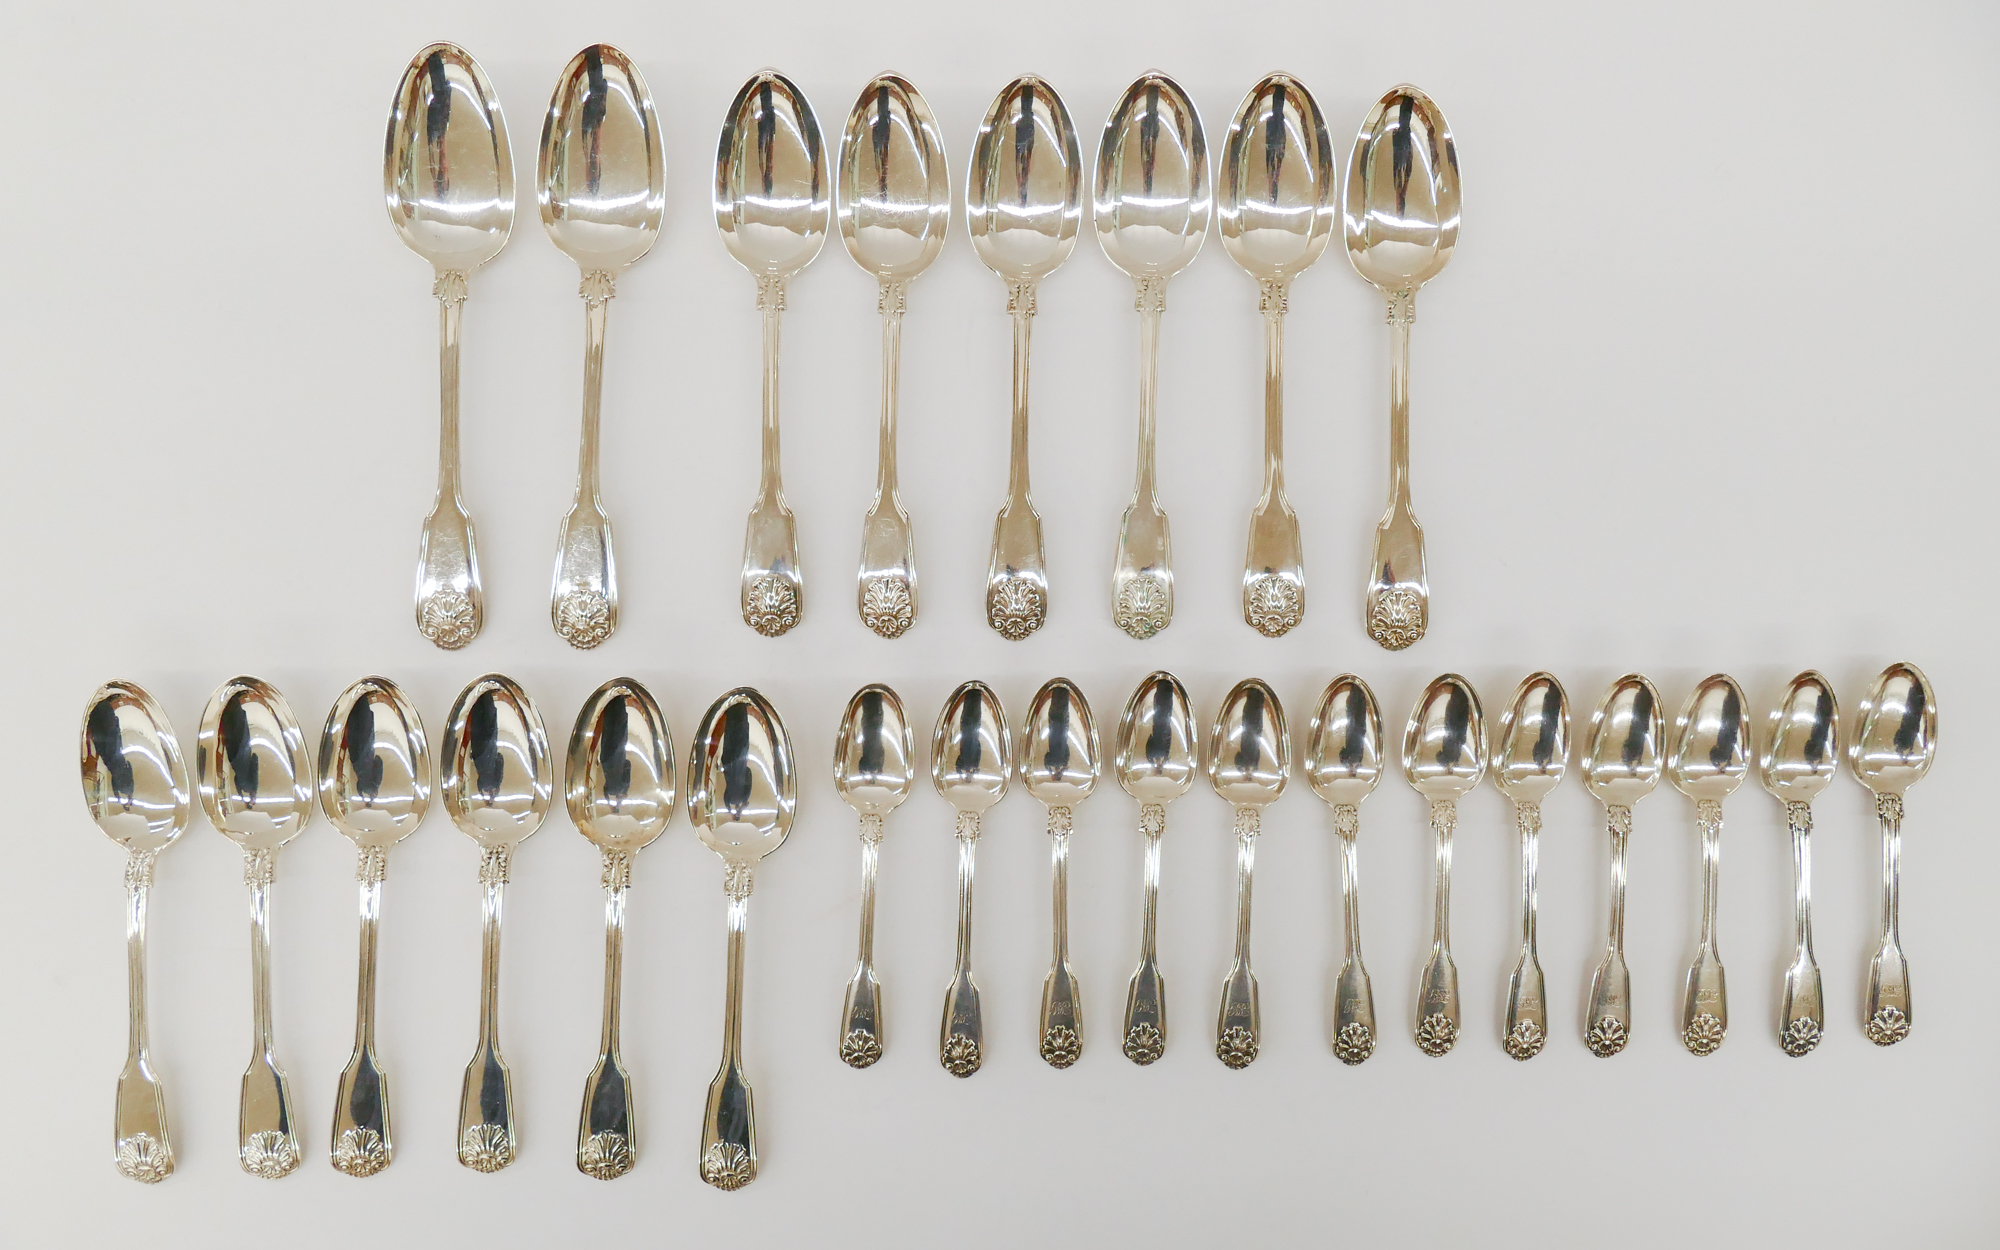 26pc Antique English Sterling King's